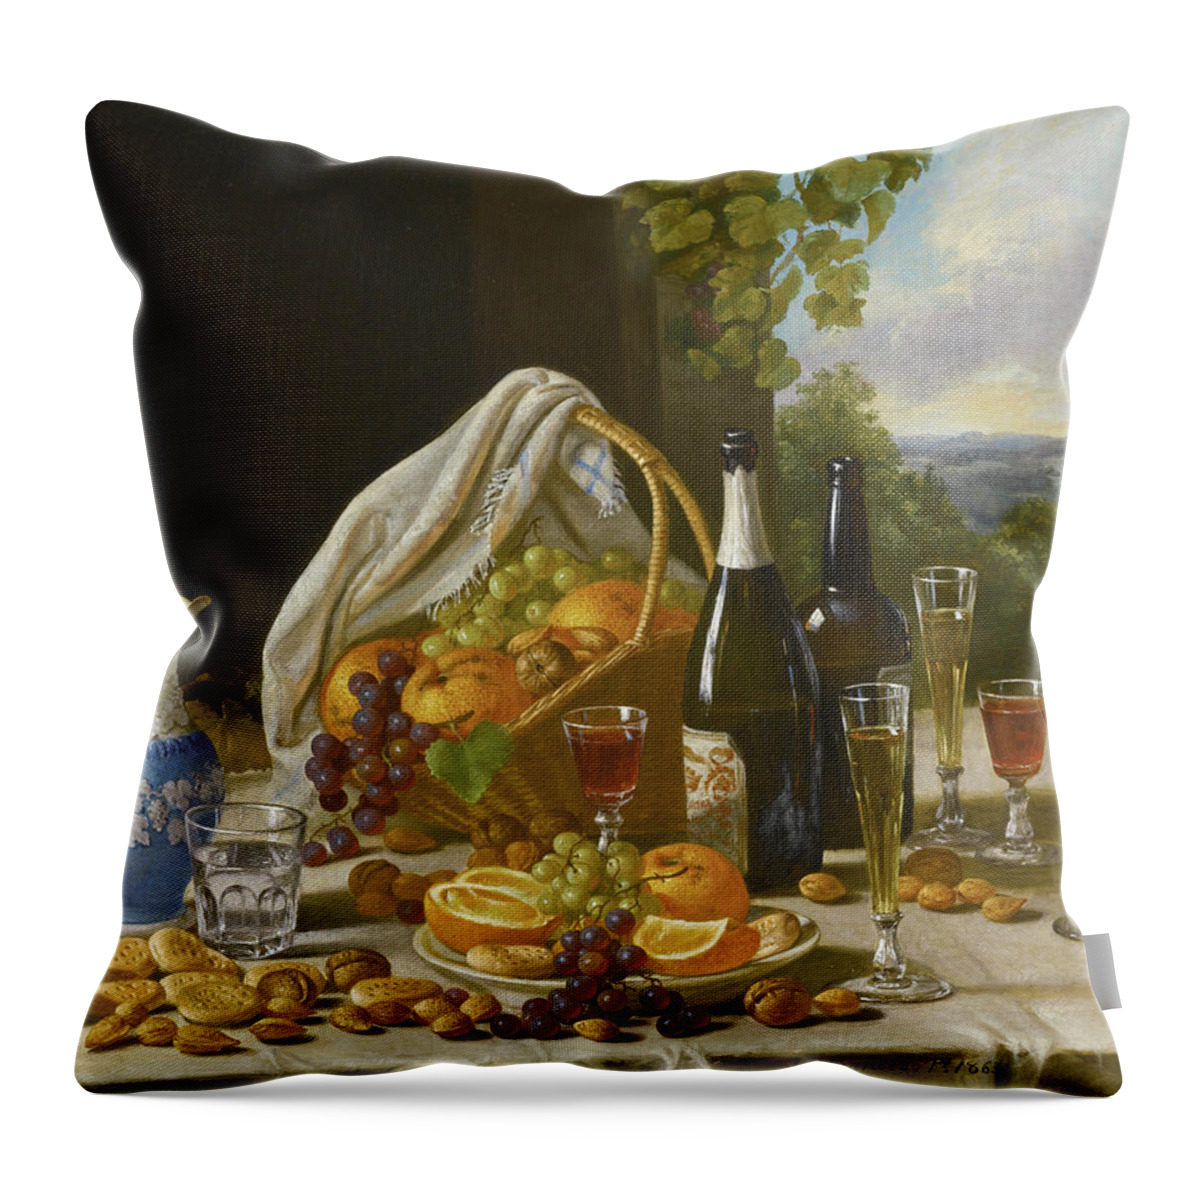 John F Francis Throw Pillow featuring the painting Still Life with Wine and Fruit by John F Francis